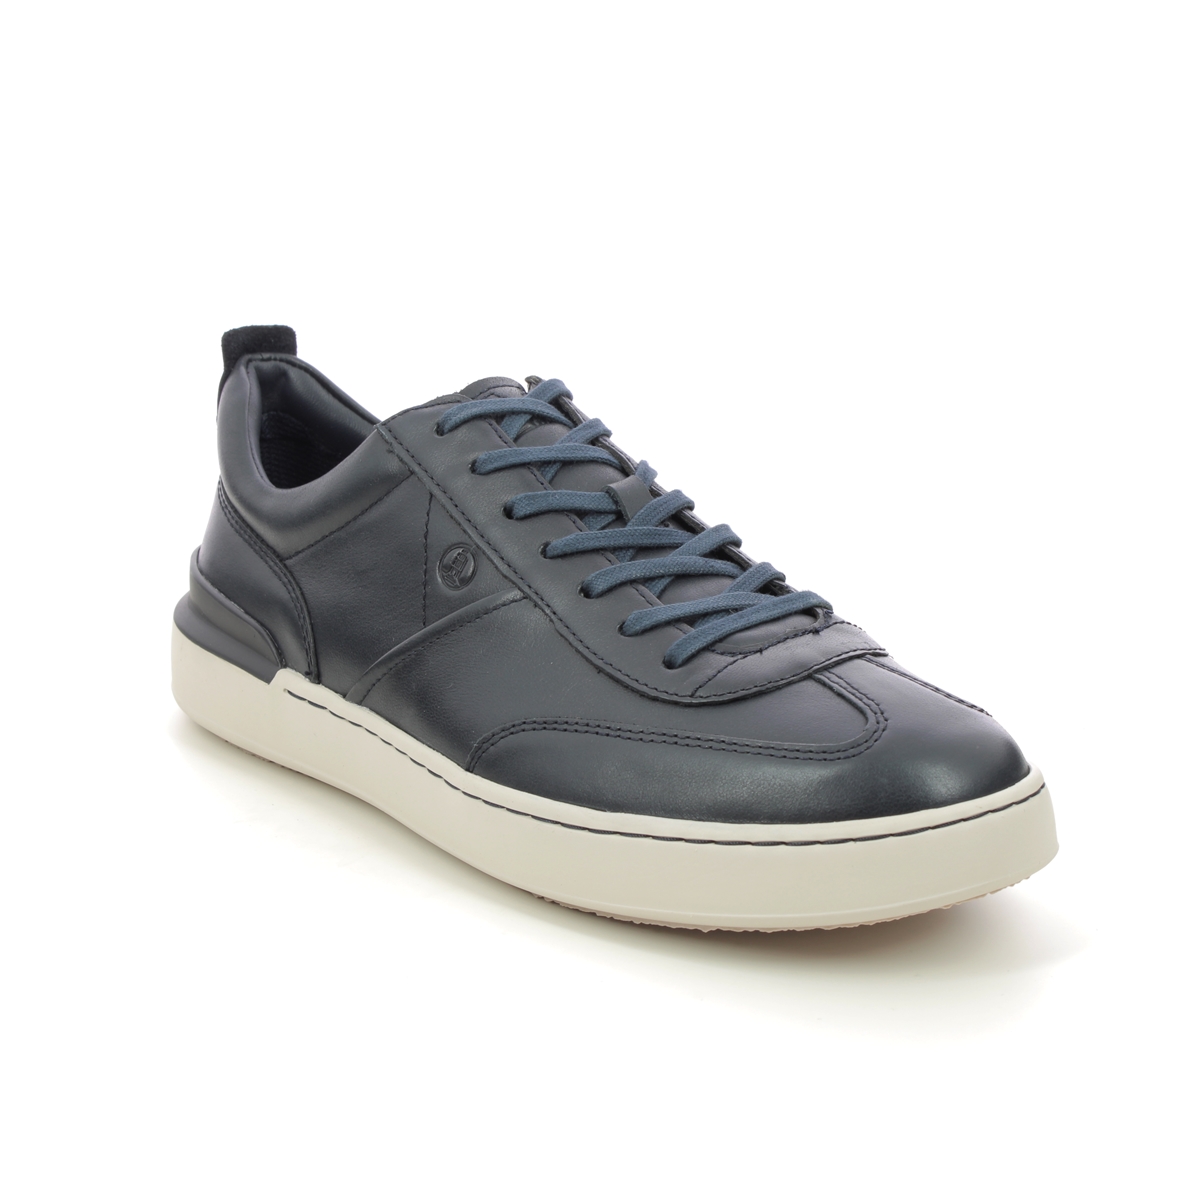 Clarks Courtlite Mode Navy Leather Mens Trainers 734747G In Size 8 In Plain Navy Leather G Width Fitting